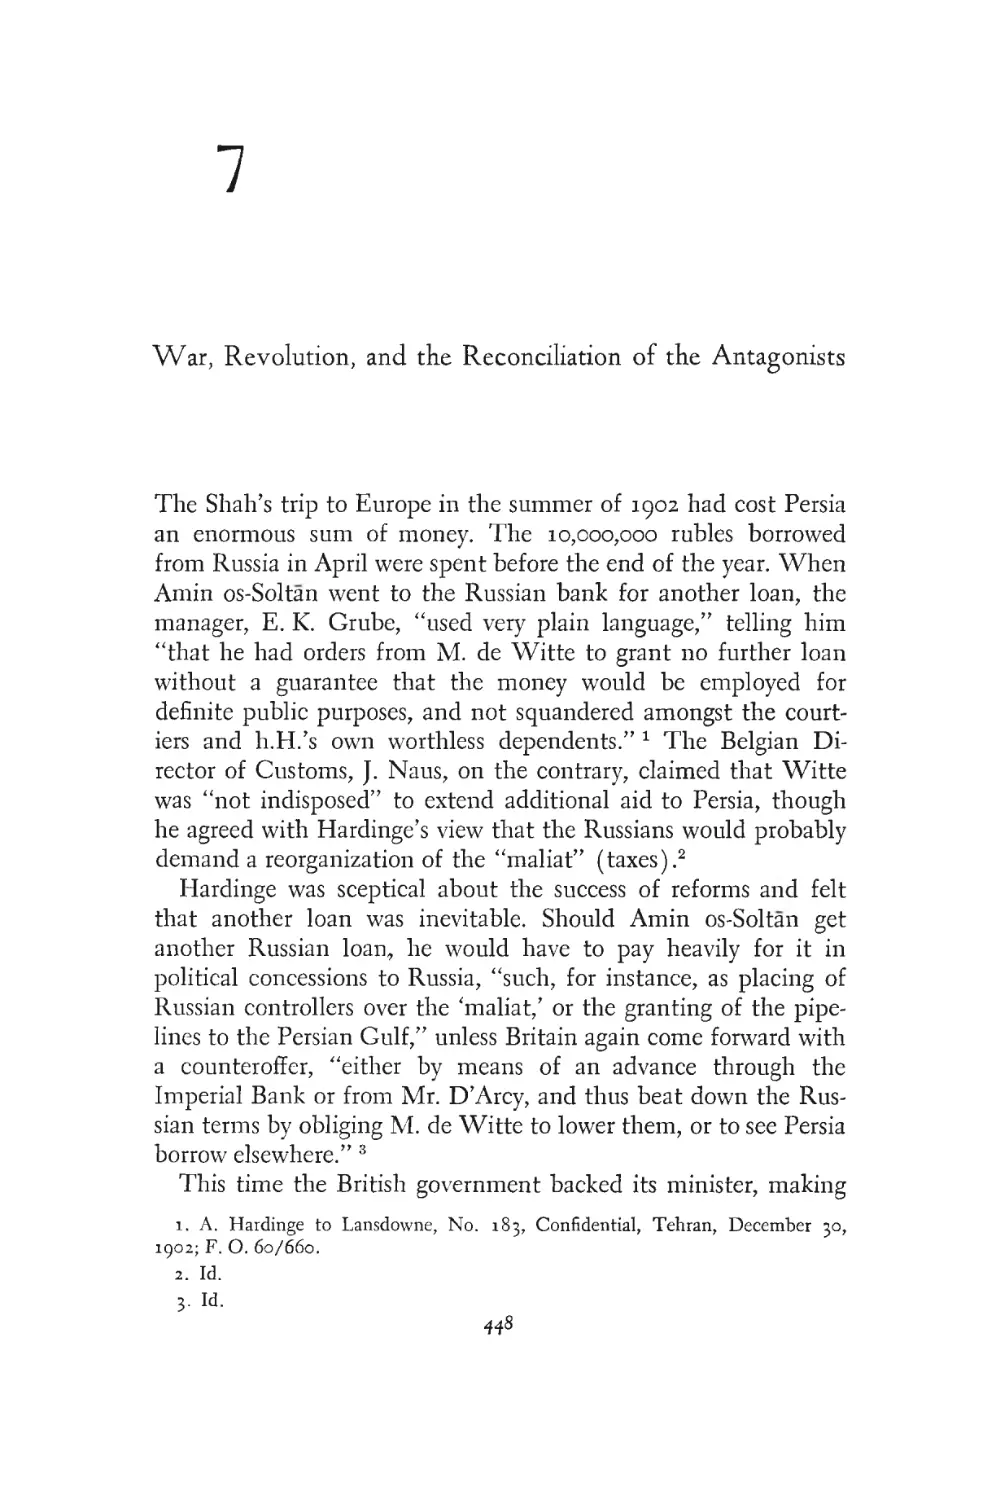 7. War, Revolution, and the Reconciliation of the Antagonists